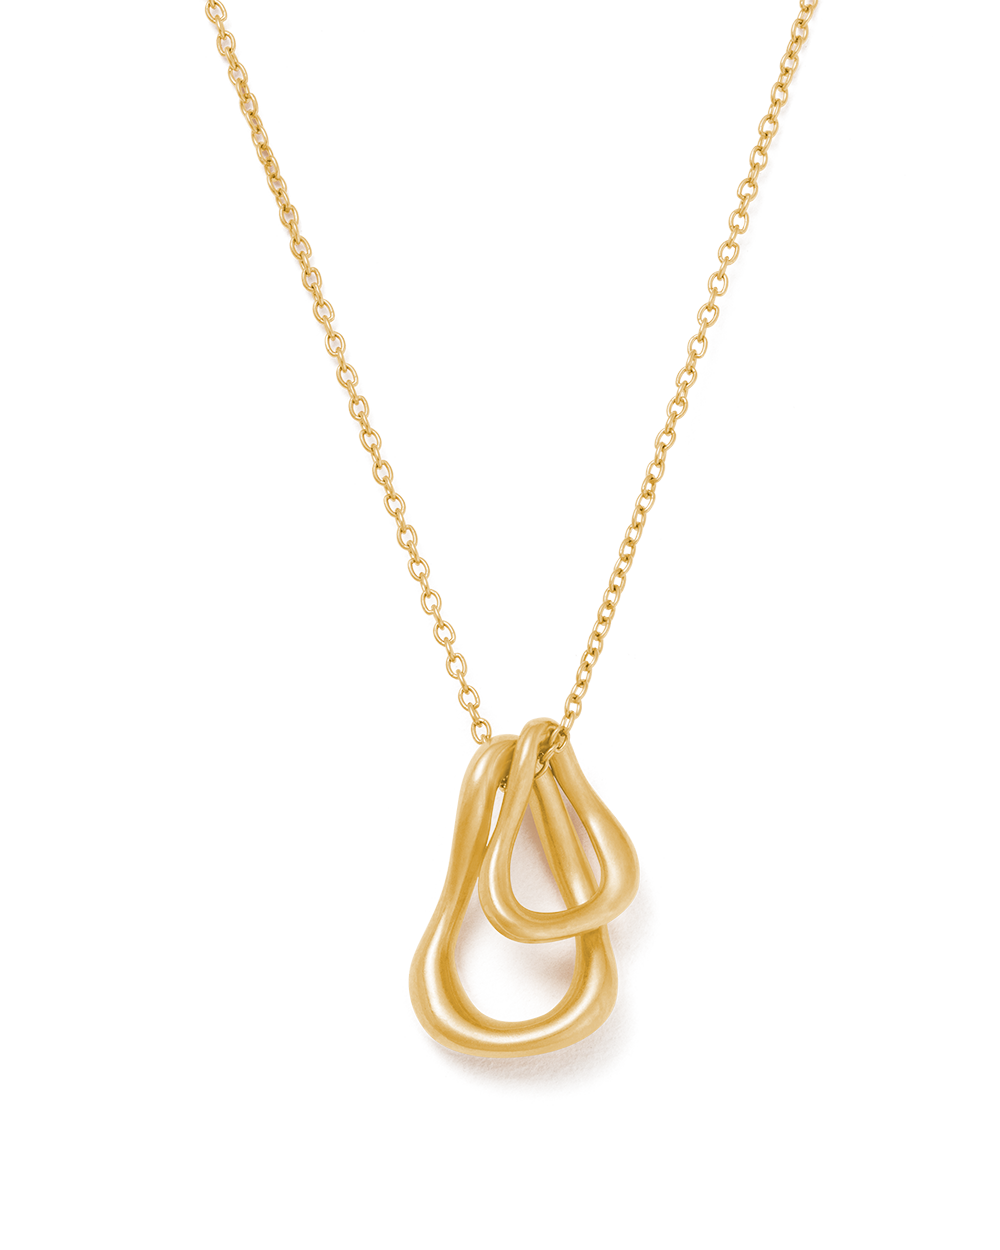 SHIFT NECKLACE (18K GOLD PLATED)